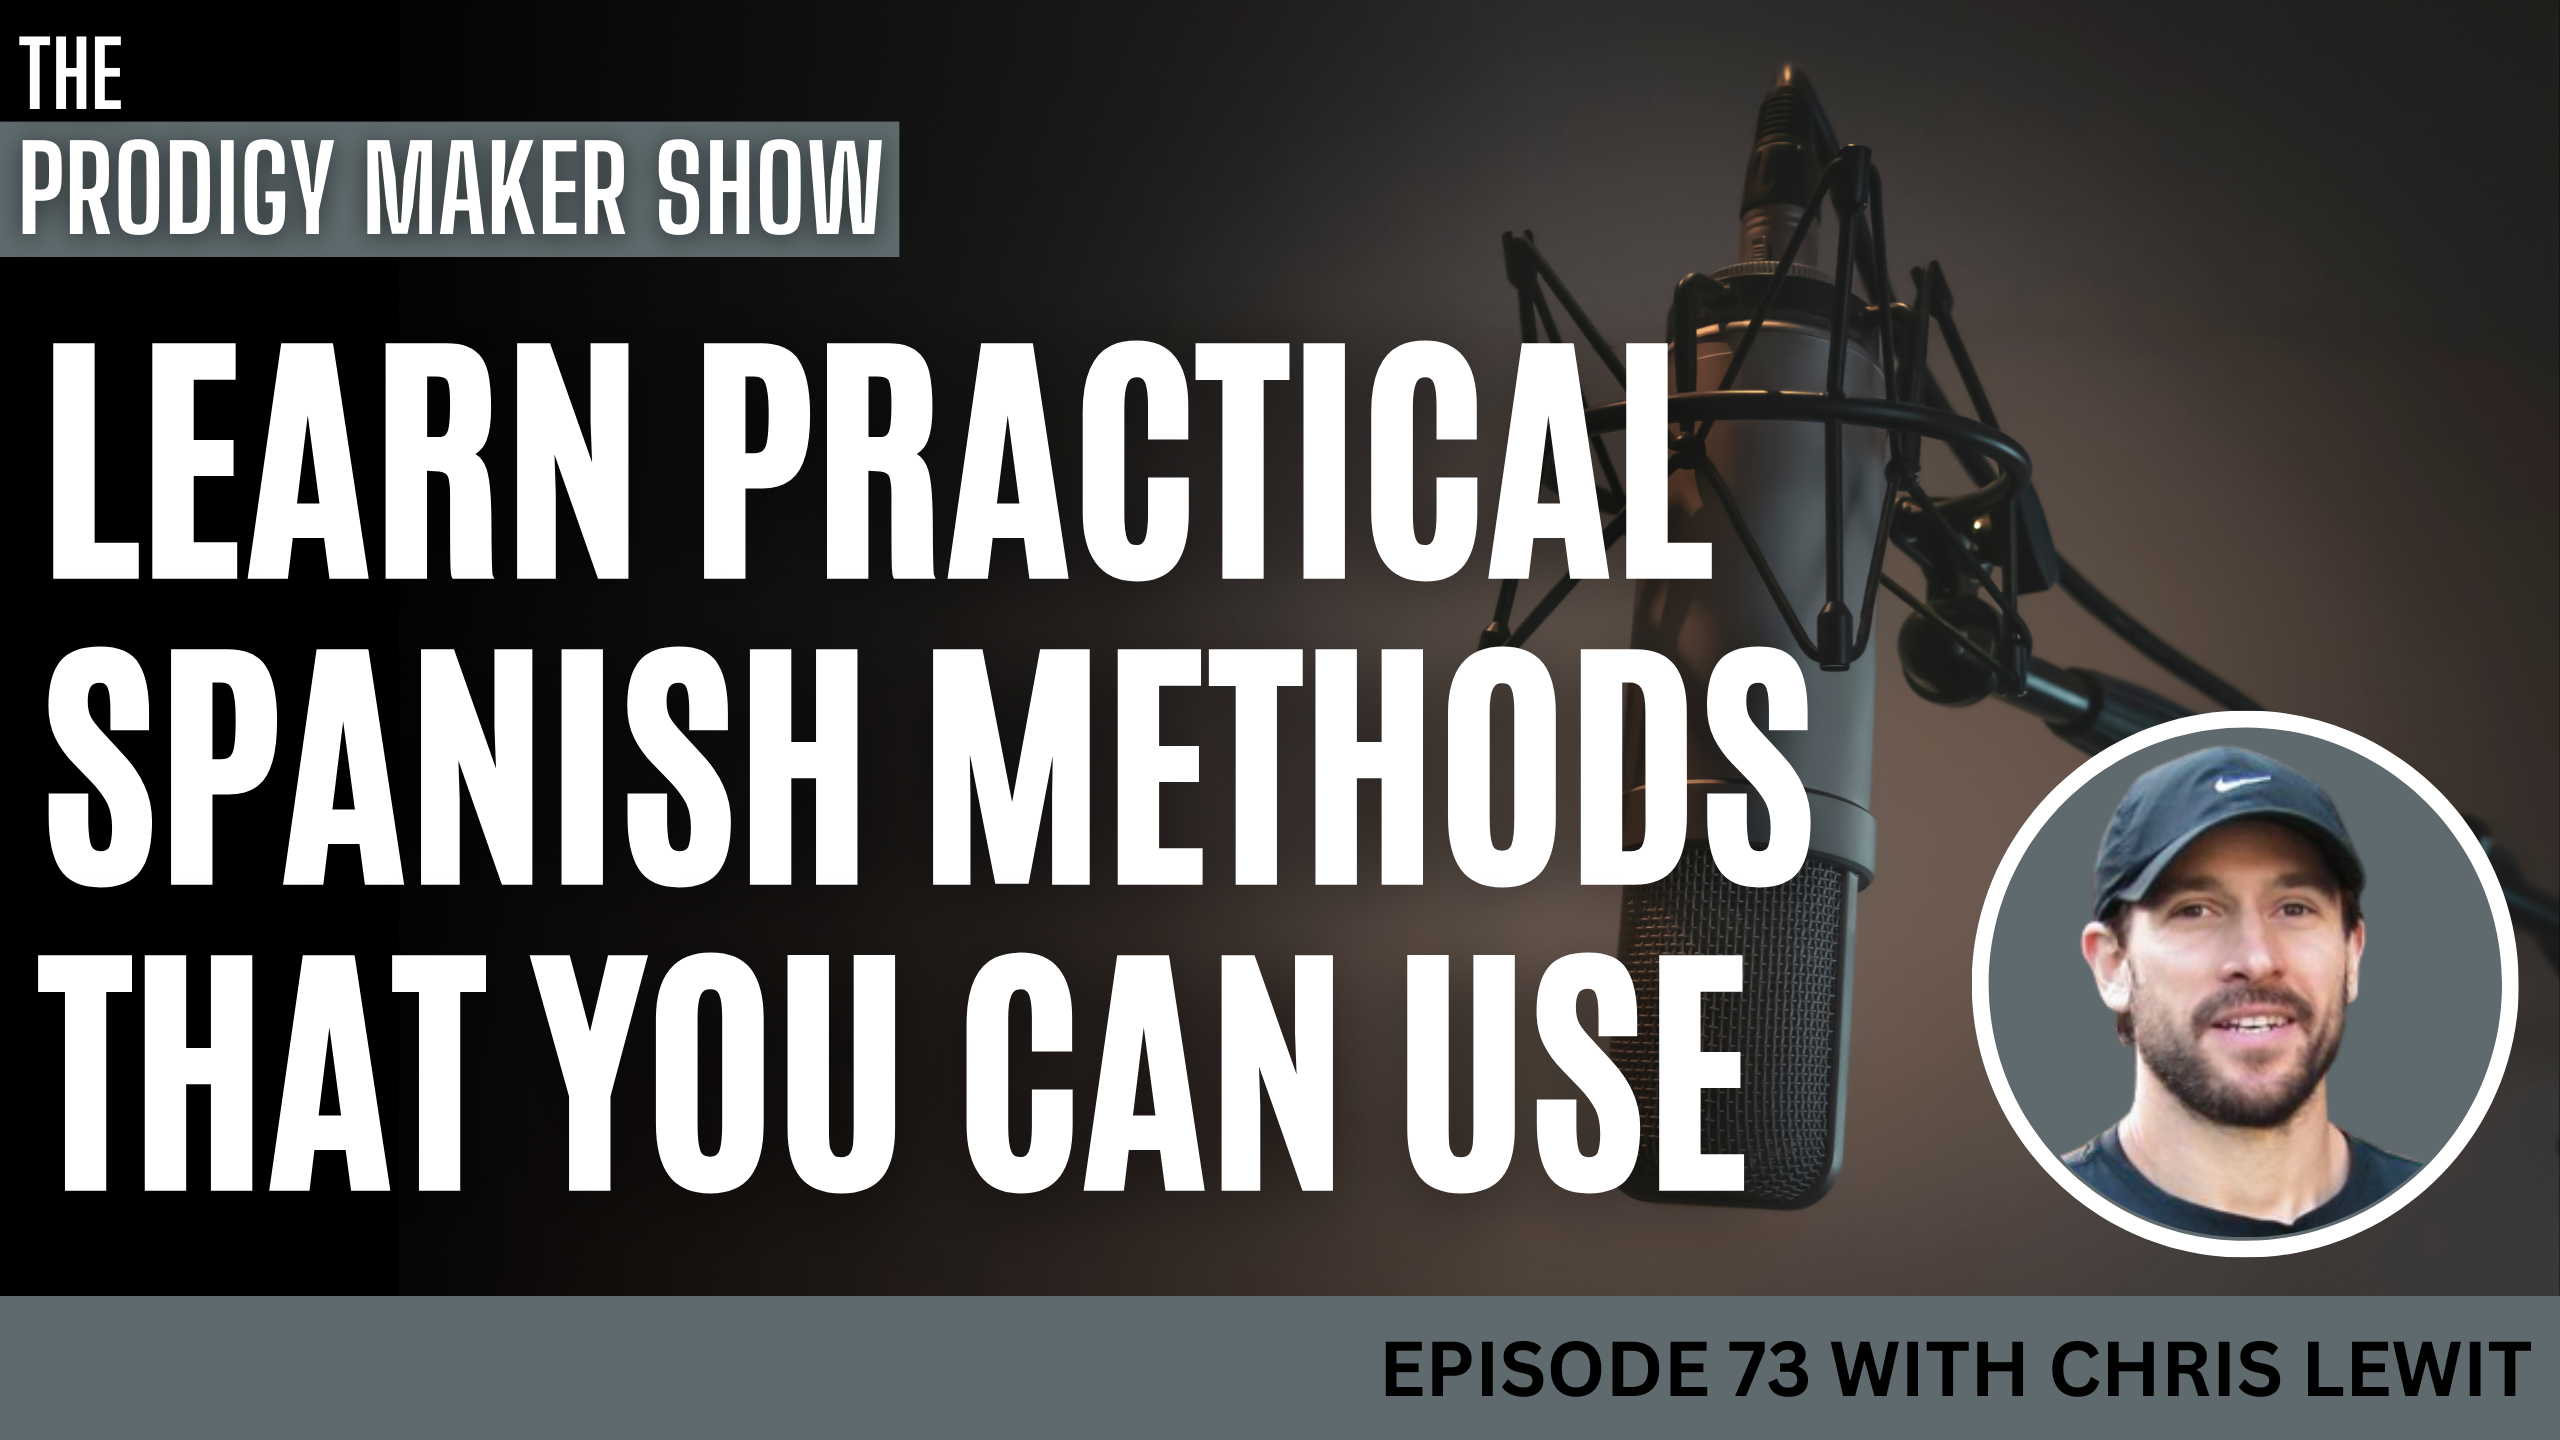 Learn Practical Spanish Methods That You Can Use - Prodigy Maker Show Episode 73